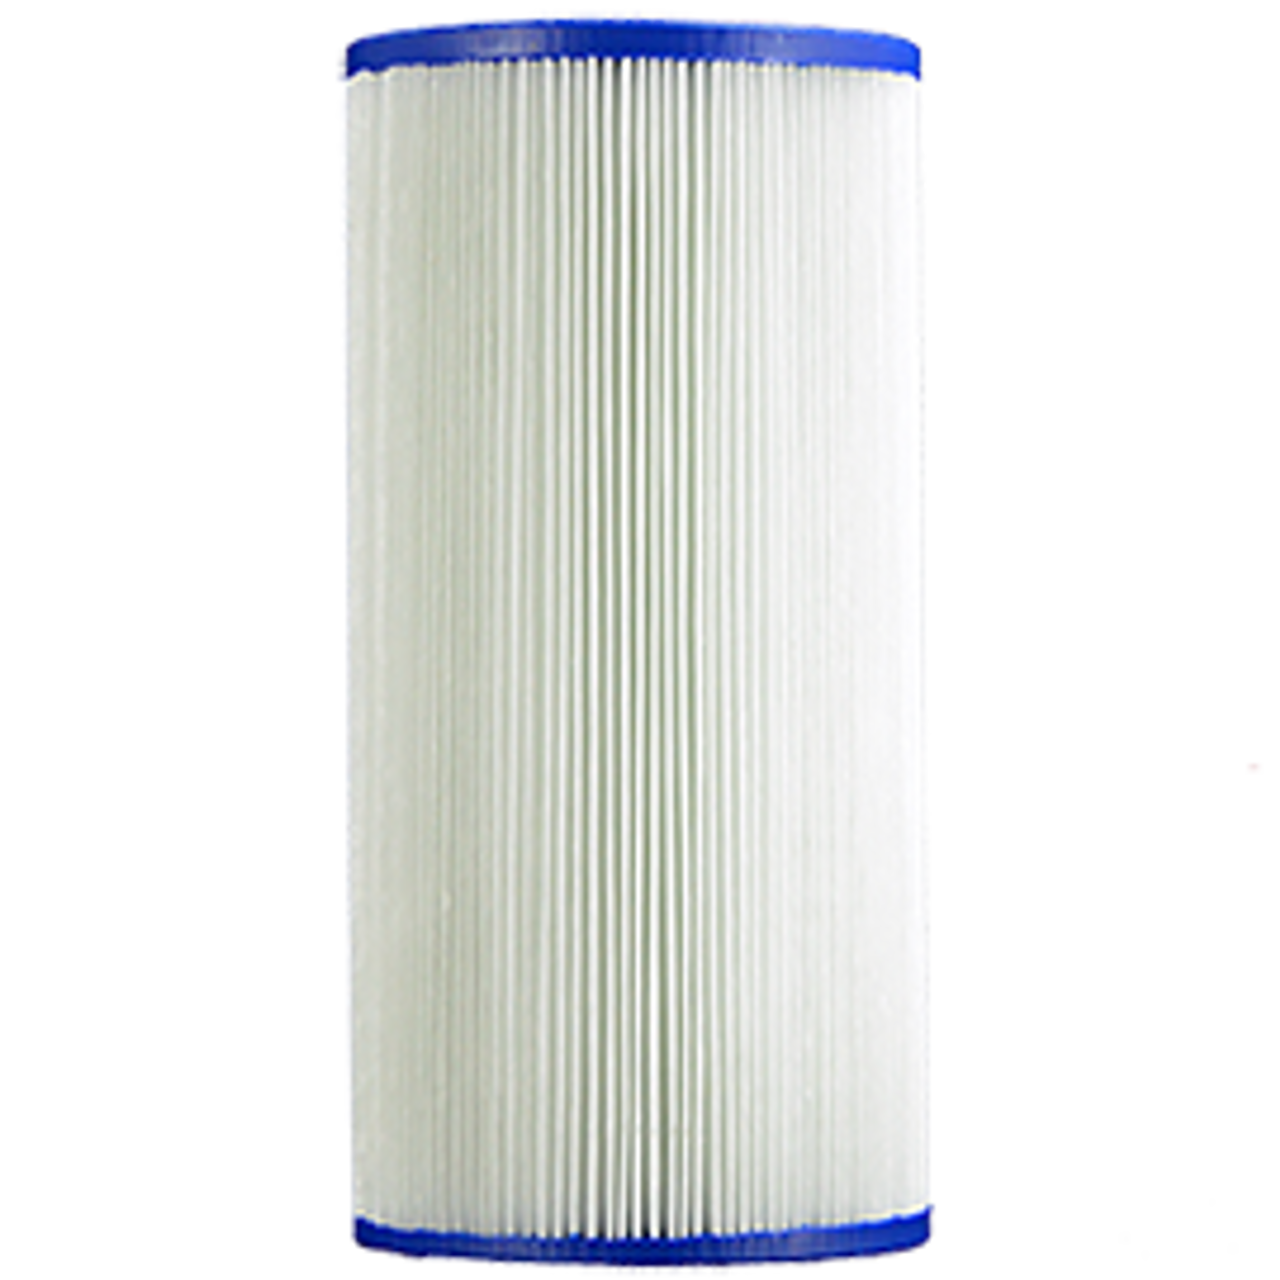 Pleatco PIN28 Cartridge Filter Replaces C-5330, AK-40041 and FC-3748